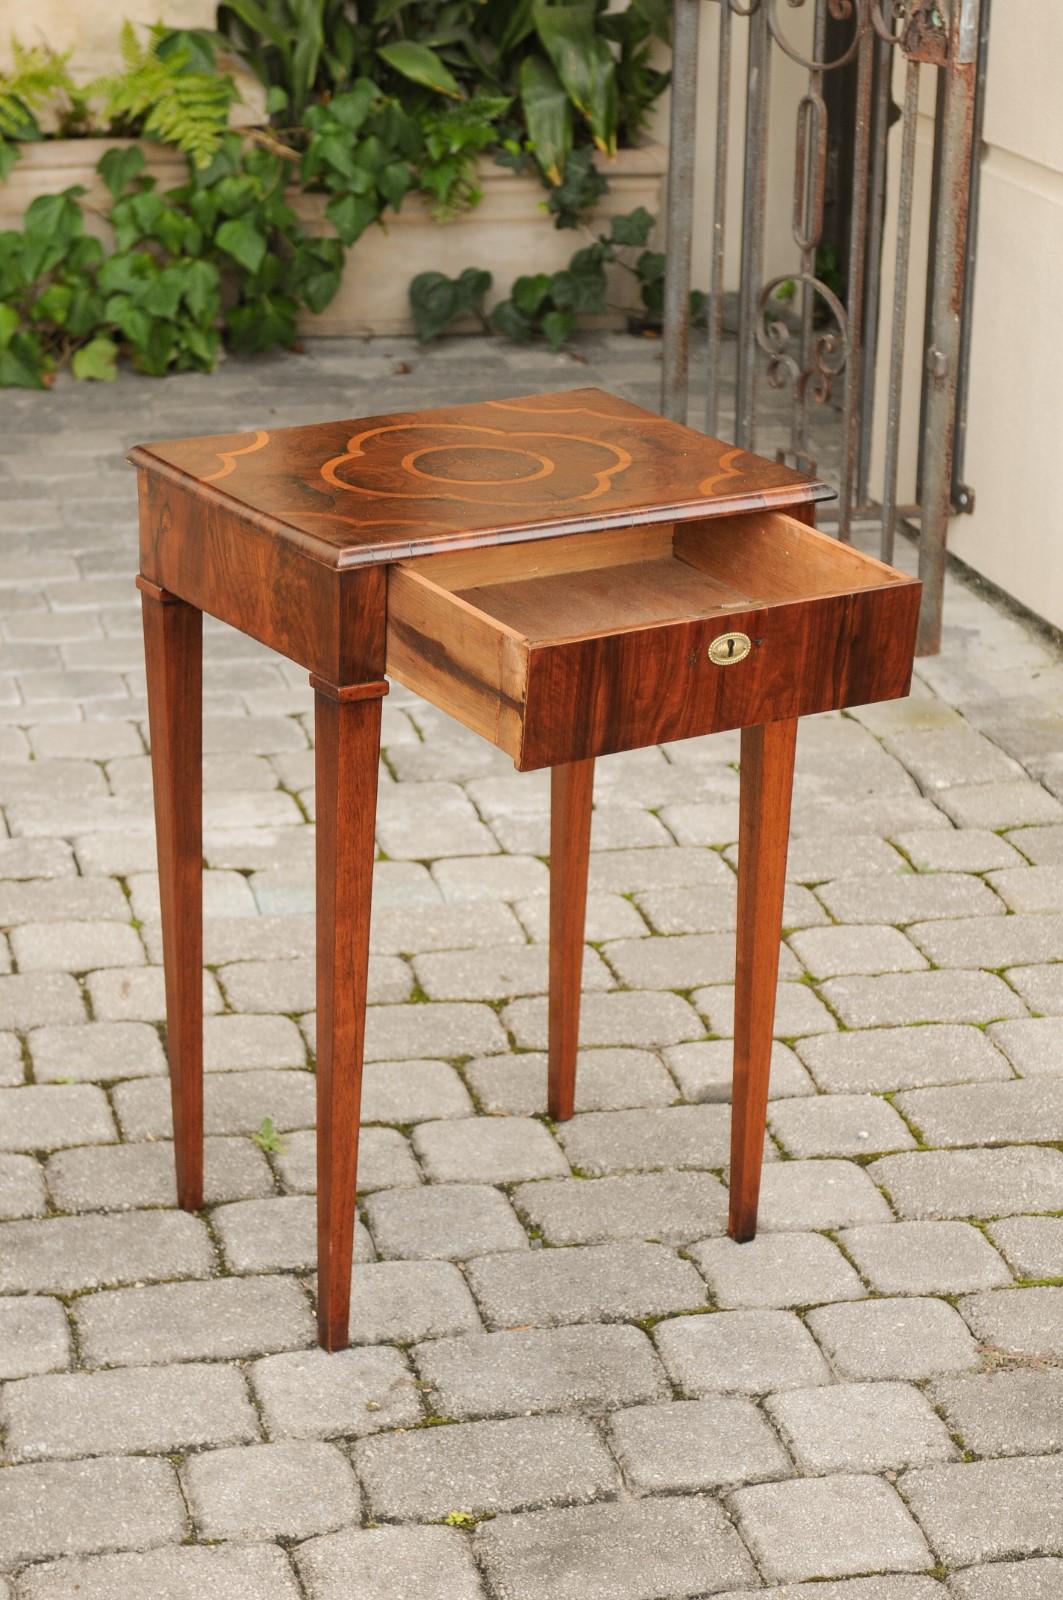 19th Century Italian 1820s Walnut Side Table with Oyster Veneer and Inlaid Quadrilobe Motif For Sale